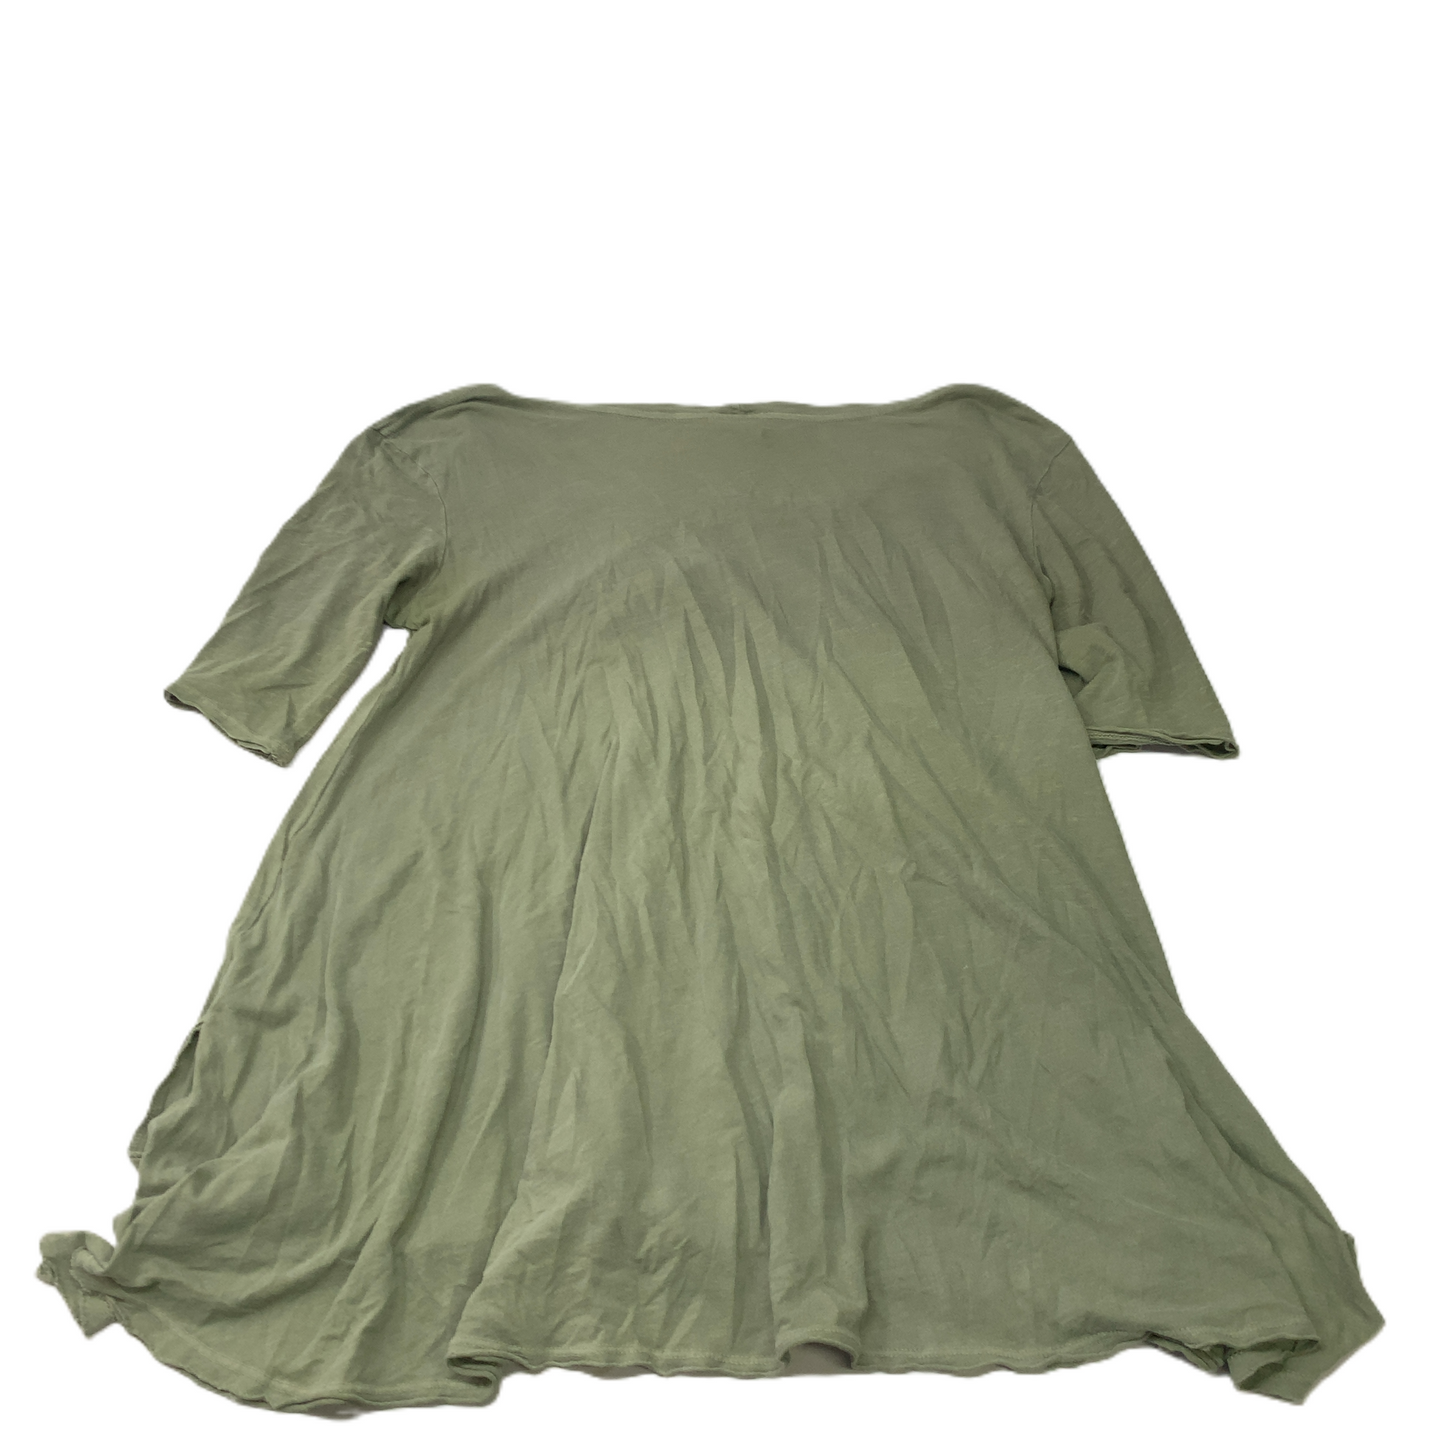 Green  Tunic Short Sleeve By Free People  Size: S